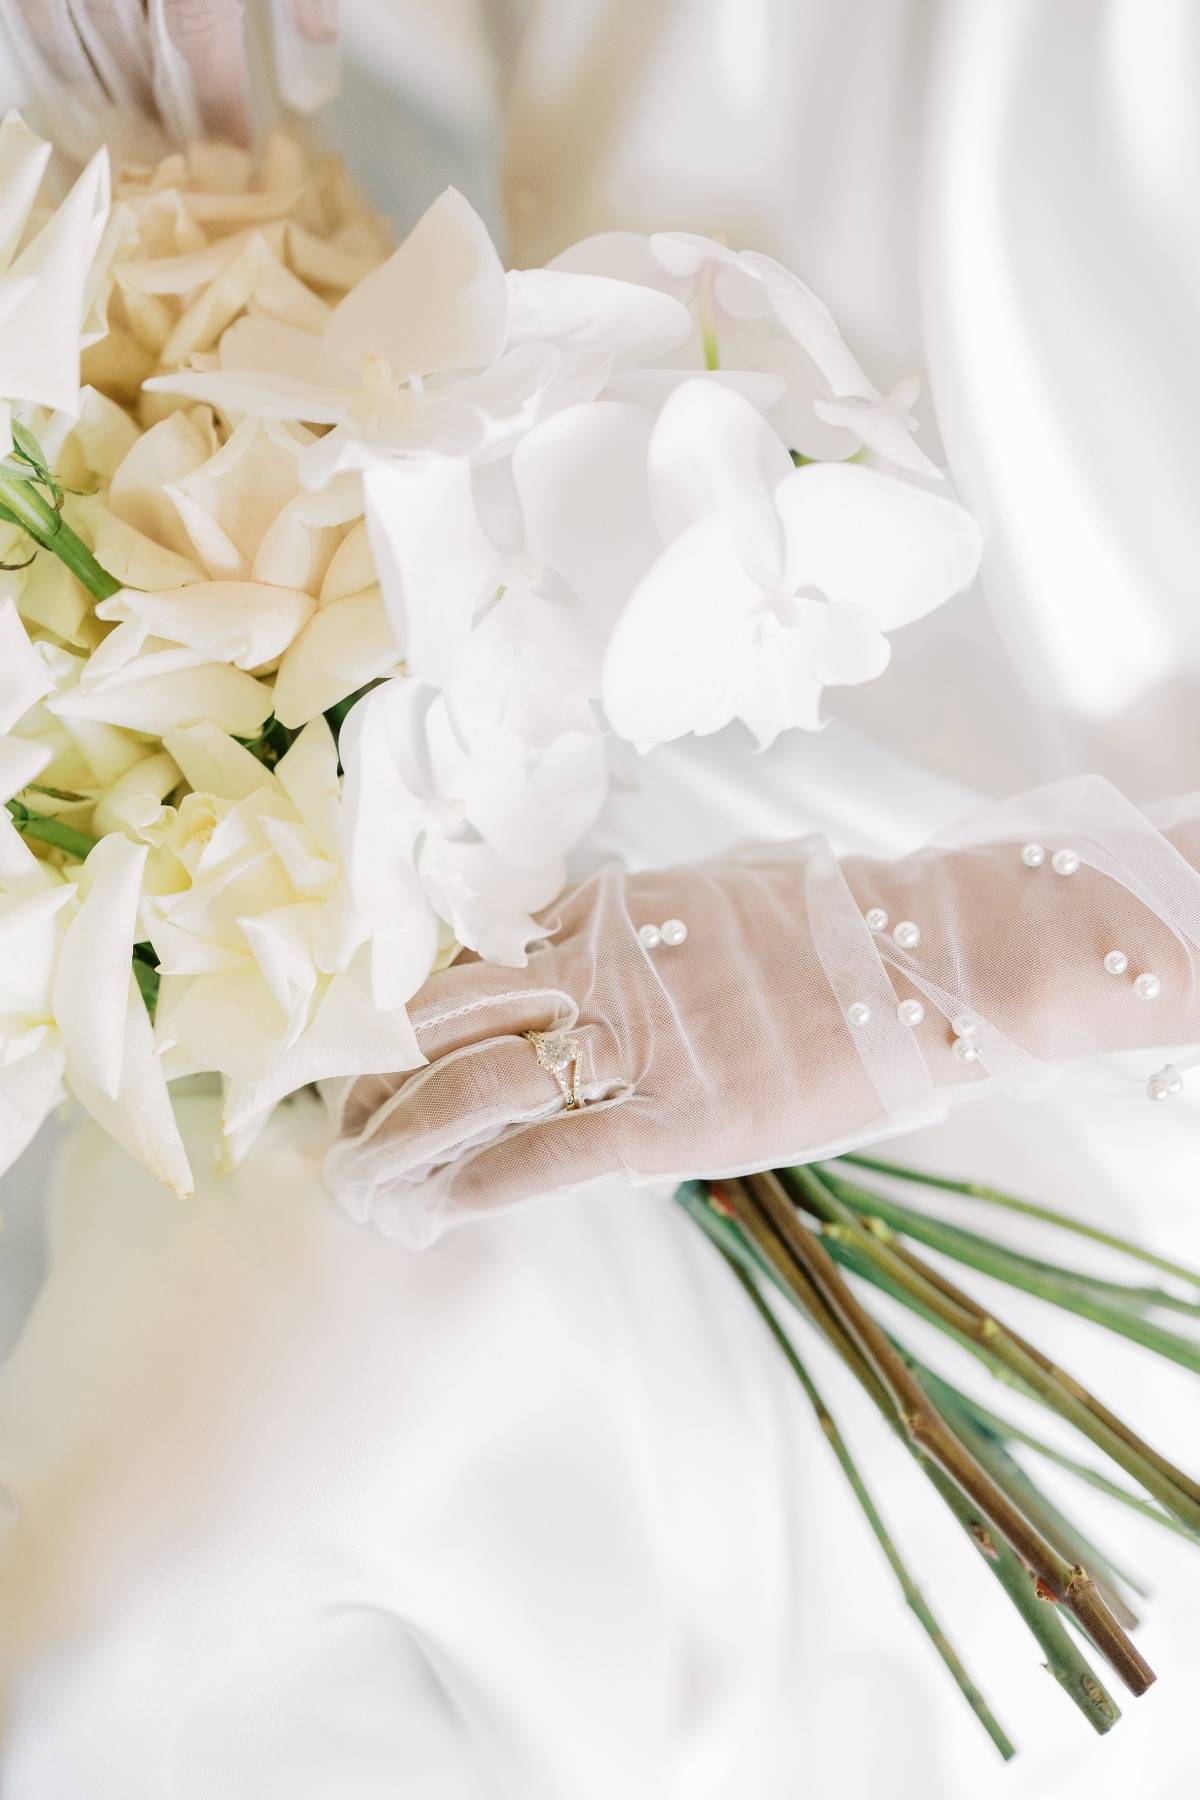 Pearl bride gloves with white orchid wedding bouquet 